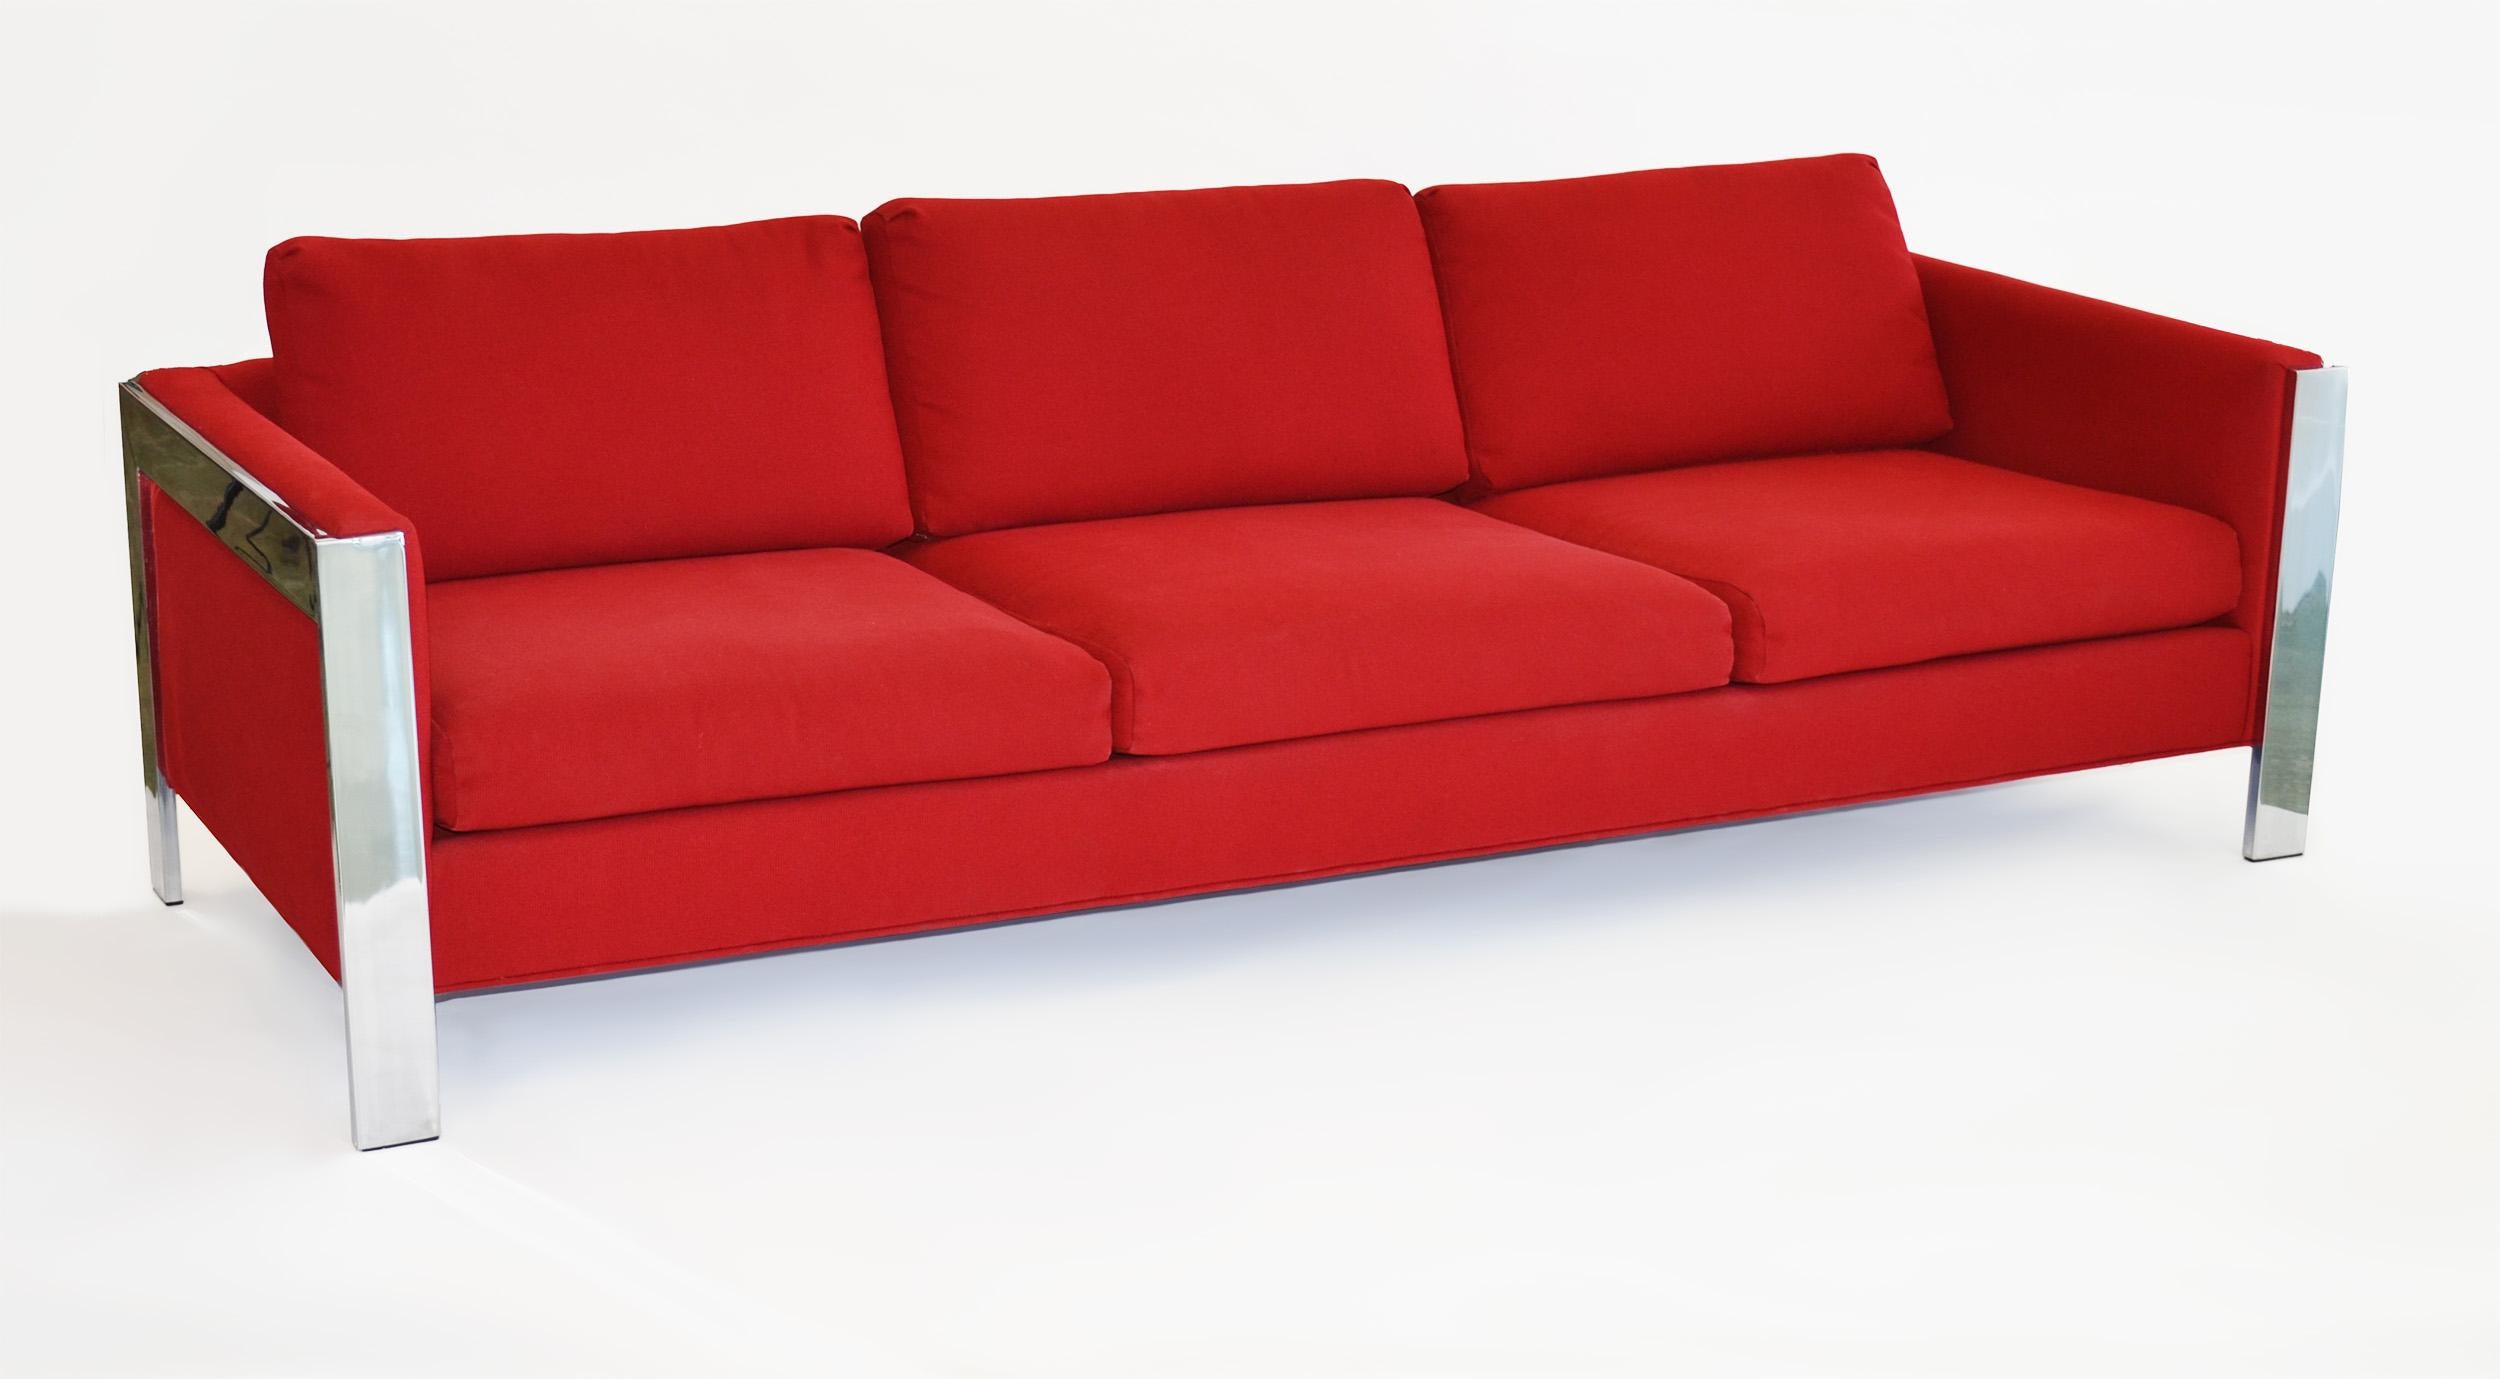 Chrome Bar 3-Seat Sofa by Milo Baughman for Thayer Coggin, USA 1970s
Gorgeous, long, low mid century sofa with flat bar chromed-steel framed arm and legs, recently re upholstered in bright red, ribbed, blend fabric. Two end pillows included. Classic